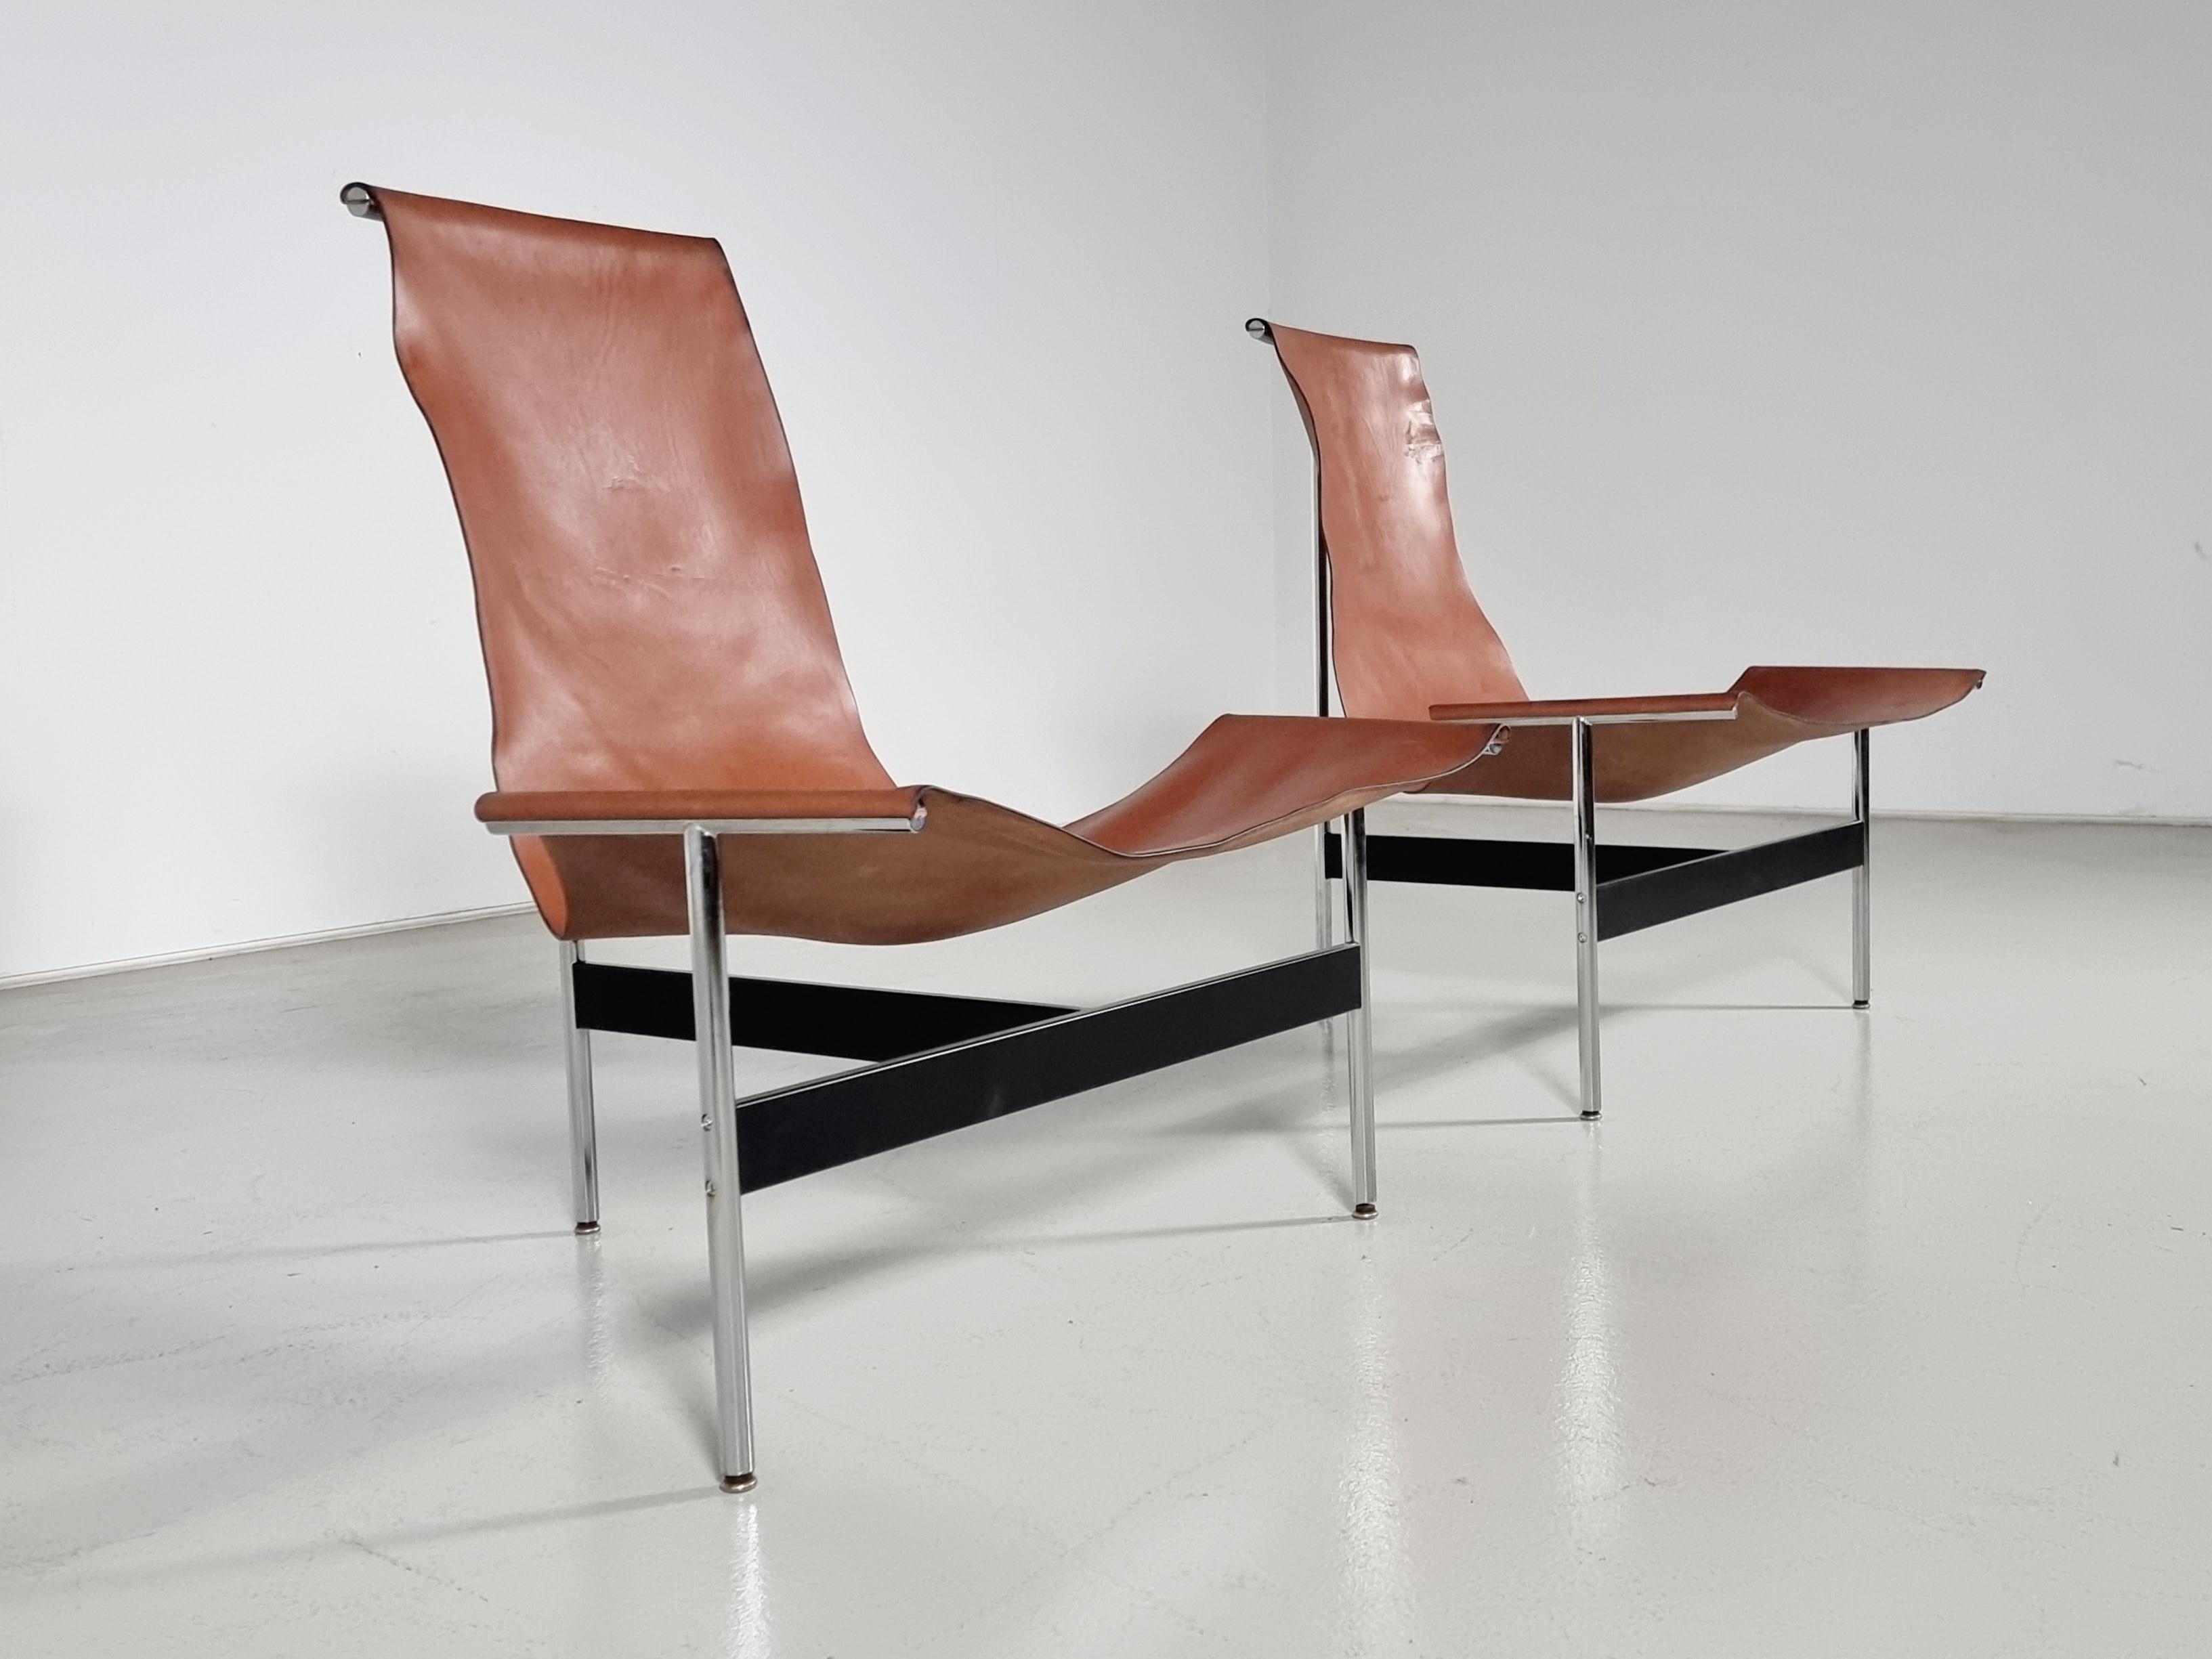 European '3LC' T-Chairs by Katavolos, Littell and Kelley for Laverne International, 1950s For Sale